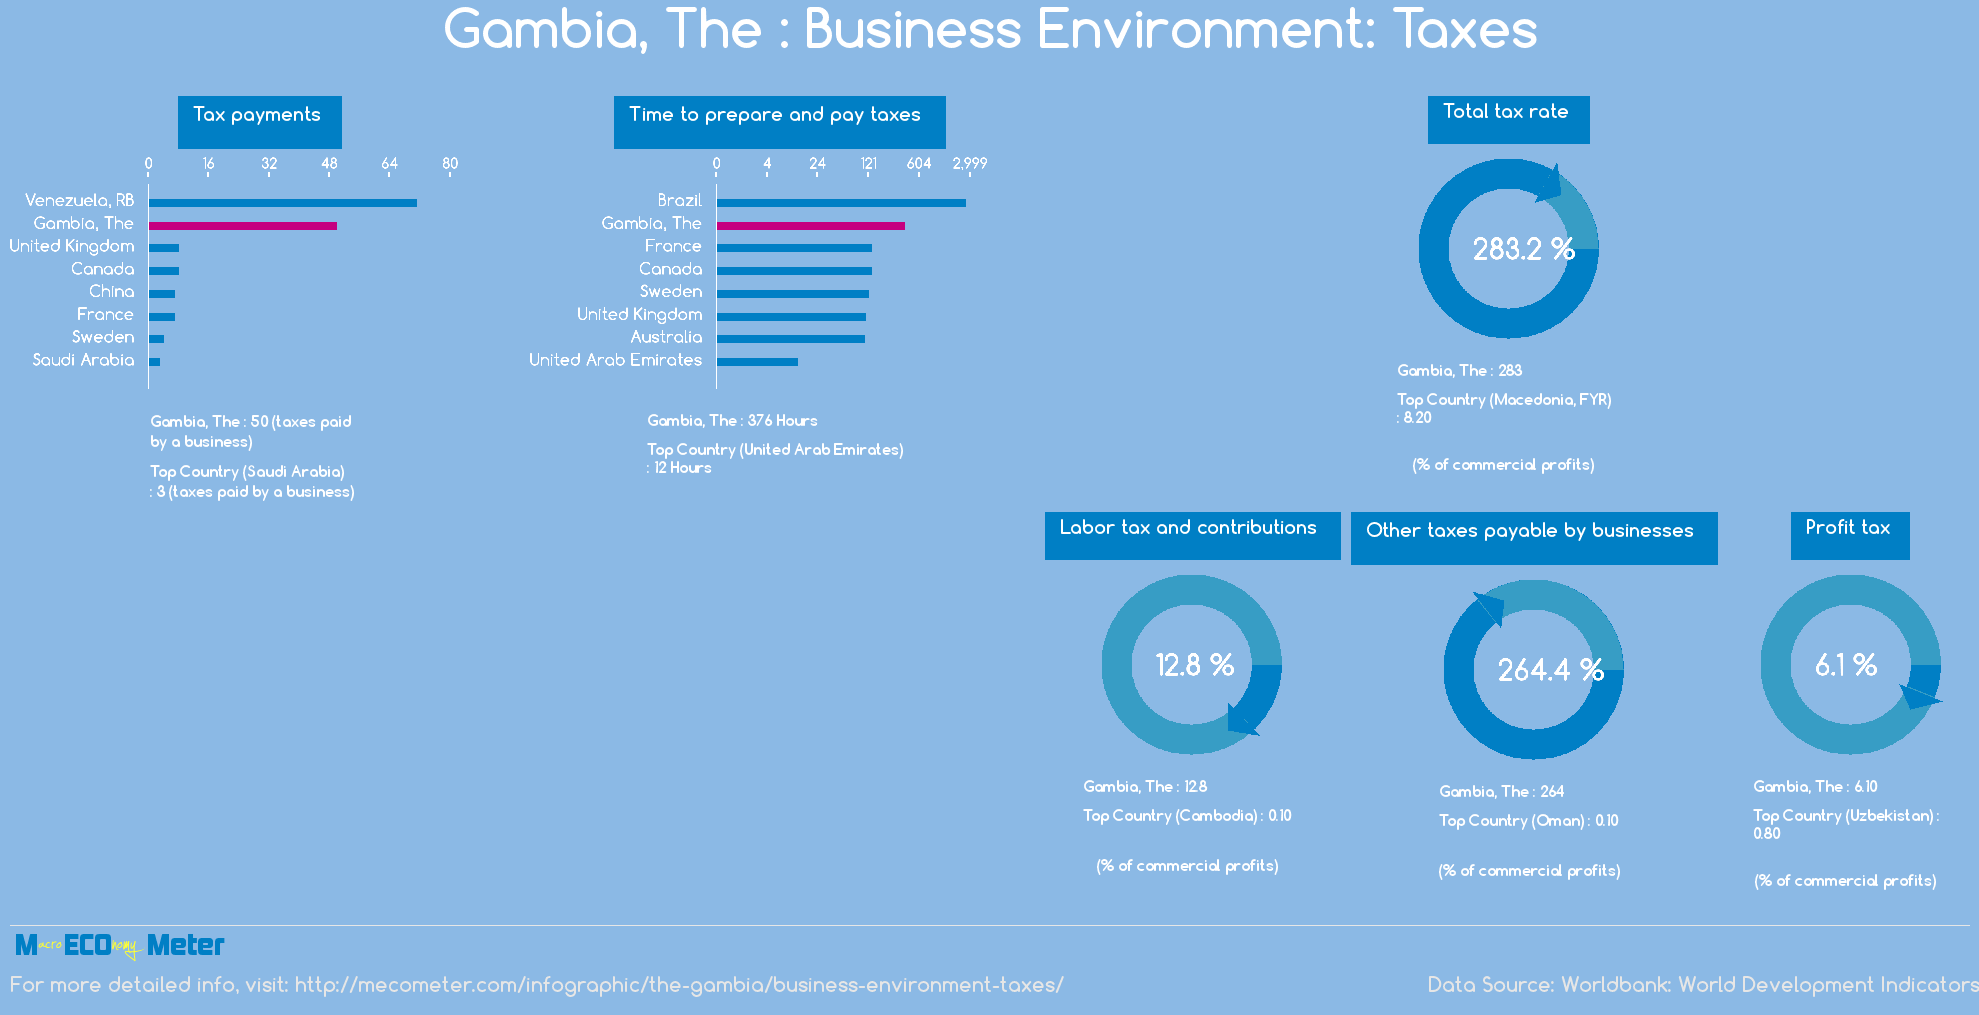 Gambia, The : Business Environment: Taxes